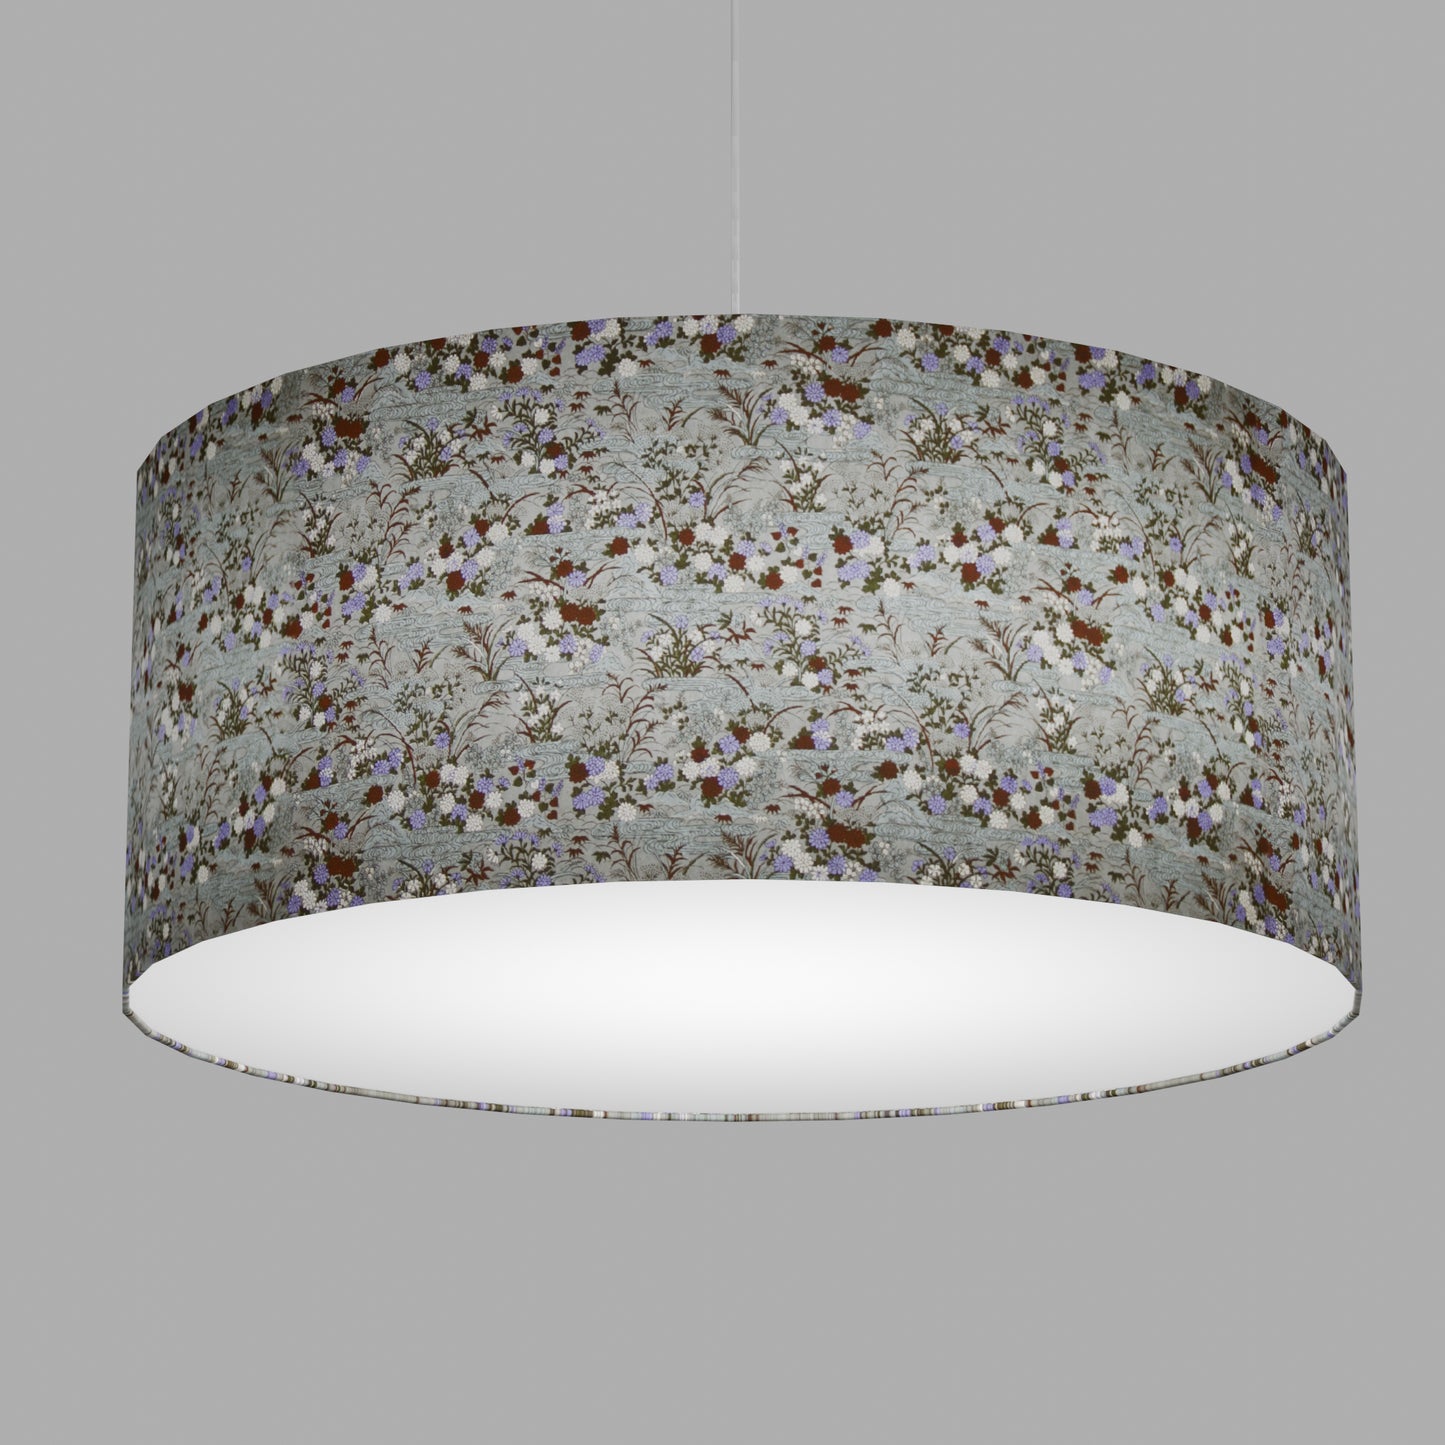 Drum Lamp Shade - W08 ~ Lily Pond, 70cm(d) x 30cm(h)